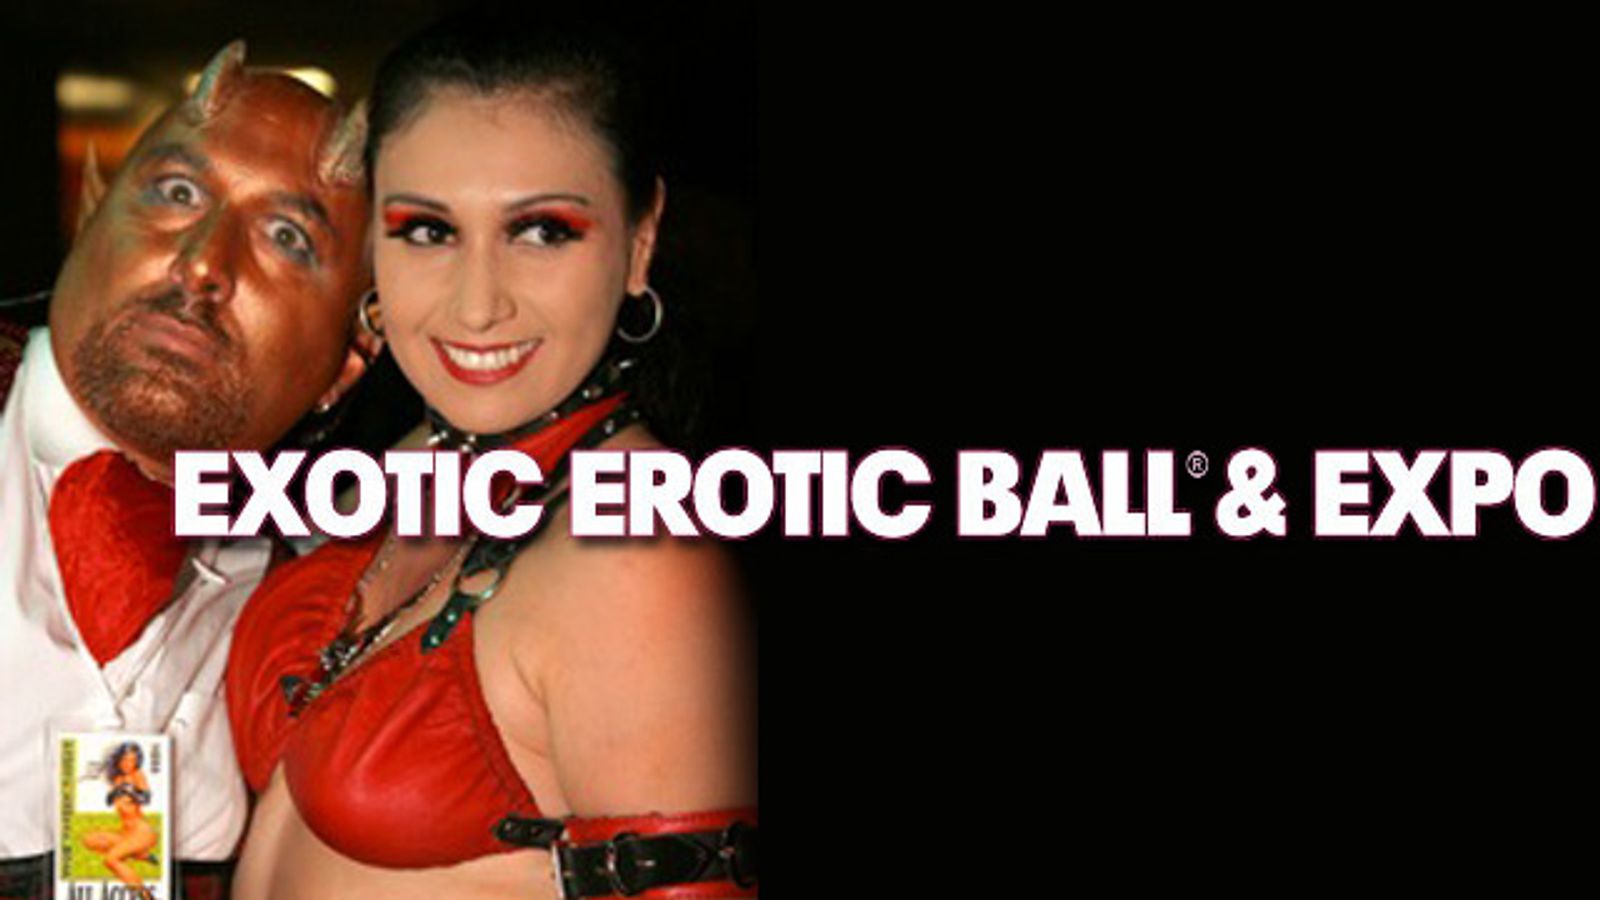 2010 Exotic Erotic Ball Features Travel Values, New Waterside Venue